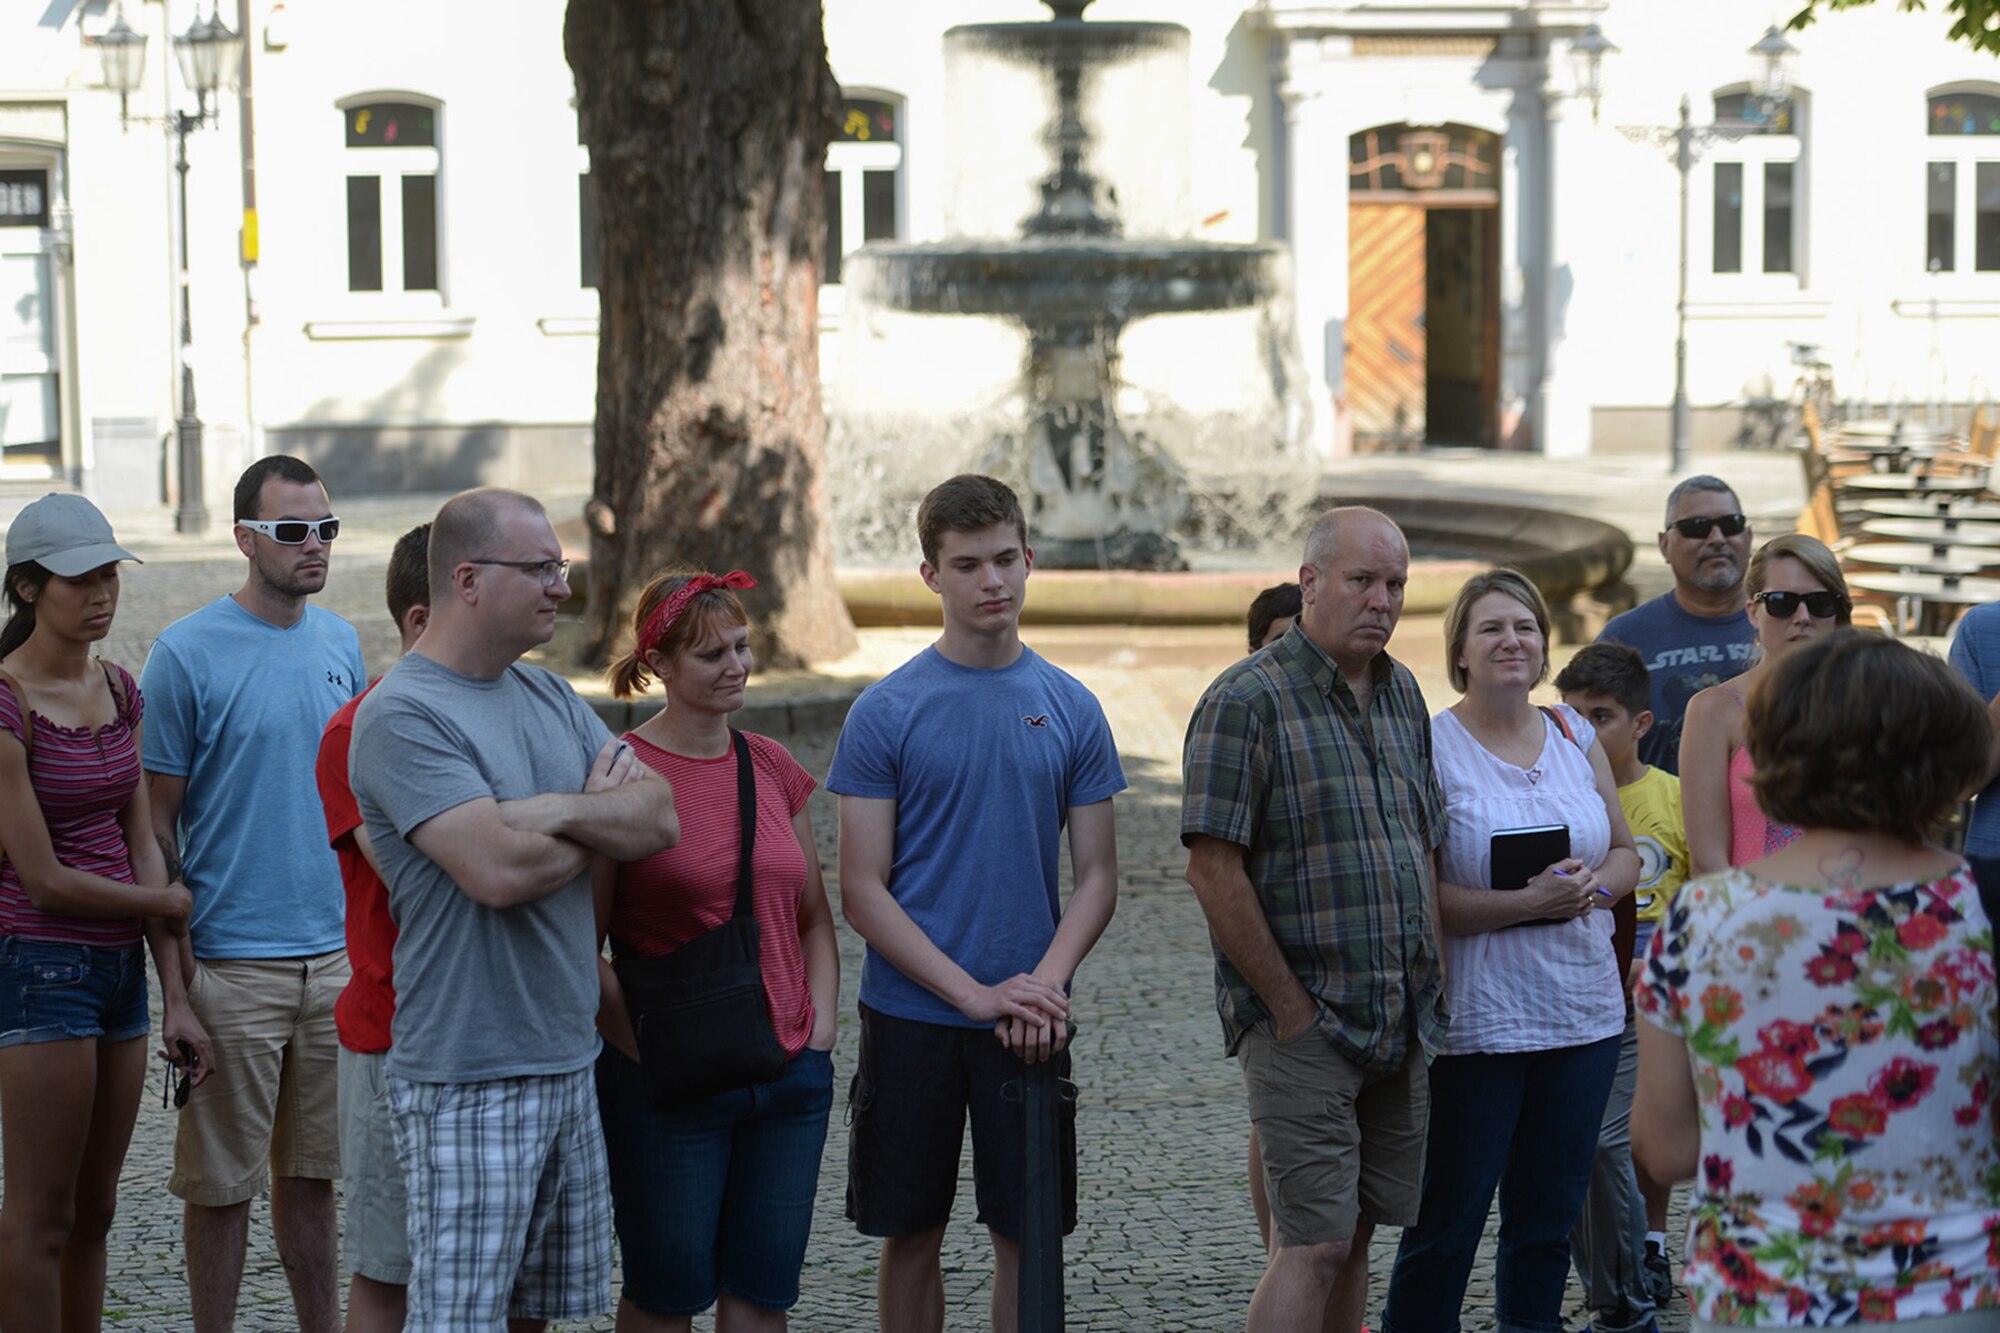 Ramstein Air Base Newcomers Tour attendees learn about the history of Kaiserslautern while touring Kaiserslautern, Germany, June 27, 2019. The RAB Newcomers Tour is scheduled for every Thursday from 8:15 a.m. to 3:45 p.m.